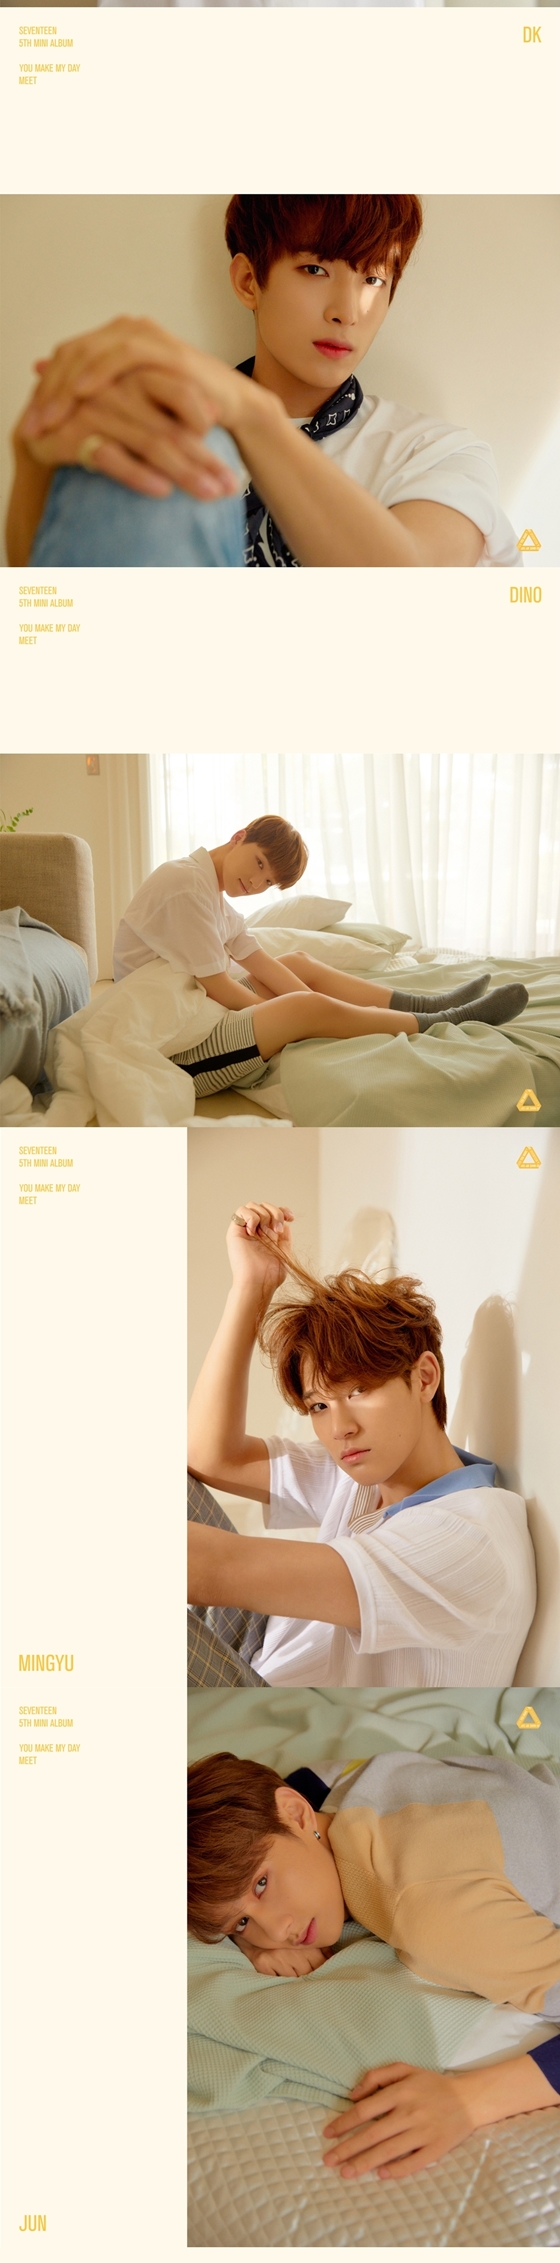 Group Seventeen, who has been collecting topics every day after confirming the release of the mini 5th album, released the title song.Pledice Entertainment, a subsidiary company, first unveiled its first personal official photo with the title song Whats the My My Day of the mini 5th album YOU MAKE MY DAY through the official SNS channel of midnight on the 4th.Seventeens title song Whats wrong, which was released with official photo, is said to be a song that captures their more sophisticated and upgraded charm than the refreshment that Seventeen, the representative of the soft stone, has emphasized.Also released together with this MEET ver.The official photo attracted attention by the members of the Seventeen members who showed different charms of 13 colors in a space where the sunshine came in and the warm color was felt.First, Vernon, Uji, and Wonwoo boasted a more perfect visual with a natural atmosphere and a gentle eye, as well as a more mature atmosphere with light.Finally, Dino, Kim Mingyu, Jun, and Hoshi have attracted a variety of charms in a natural atmosphere, including charismatic appearances and cute appearances. Yoon Jeonghan, Joshua, Seung Kwan, and Escuops have stared at the front in each place with a quiet and languid feeling, creating a warm and lyrical atmosphere.On the other hand, Seventeen will release the entire song soundtrack of the mini 5th album YOU MAKE MY DAY (Y Make My Day) through various online soundtrack sites at 6 pm on the 16th.Photo: Pledis Entertainment